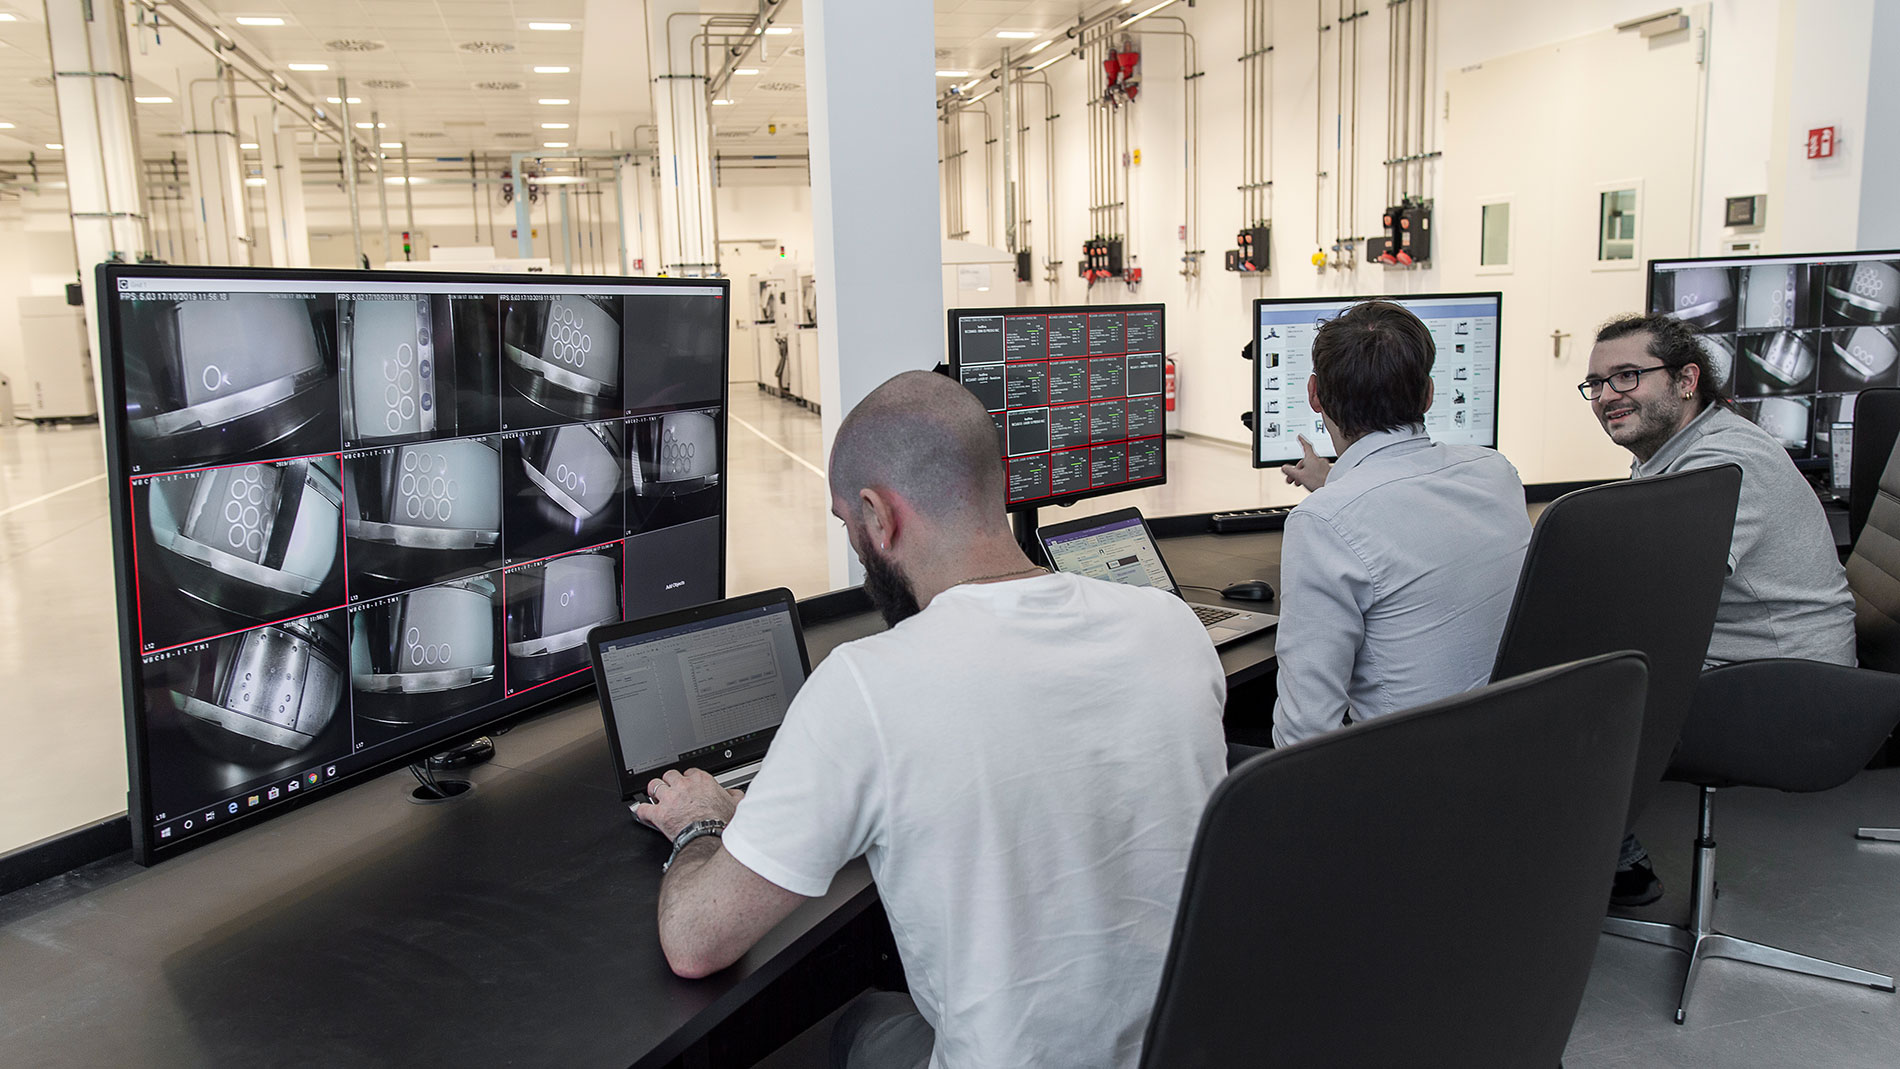 Employees monitor the 3D printers at the Additive Innovation Center in real time from this impressive command center. Picture: Lincotek